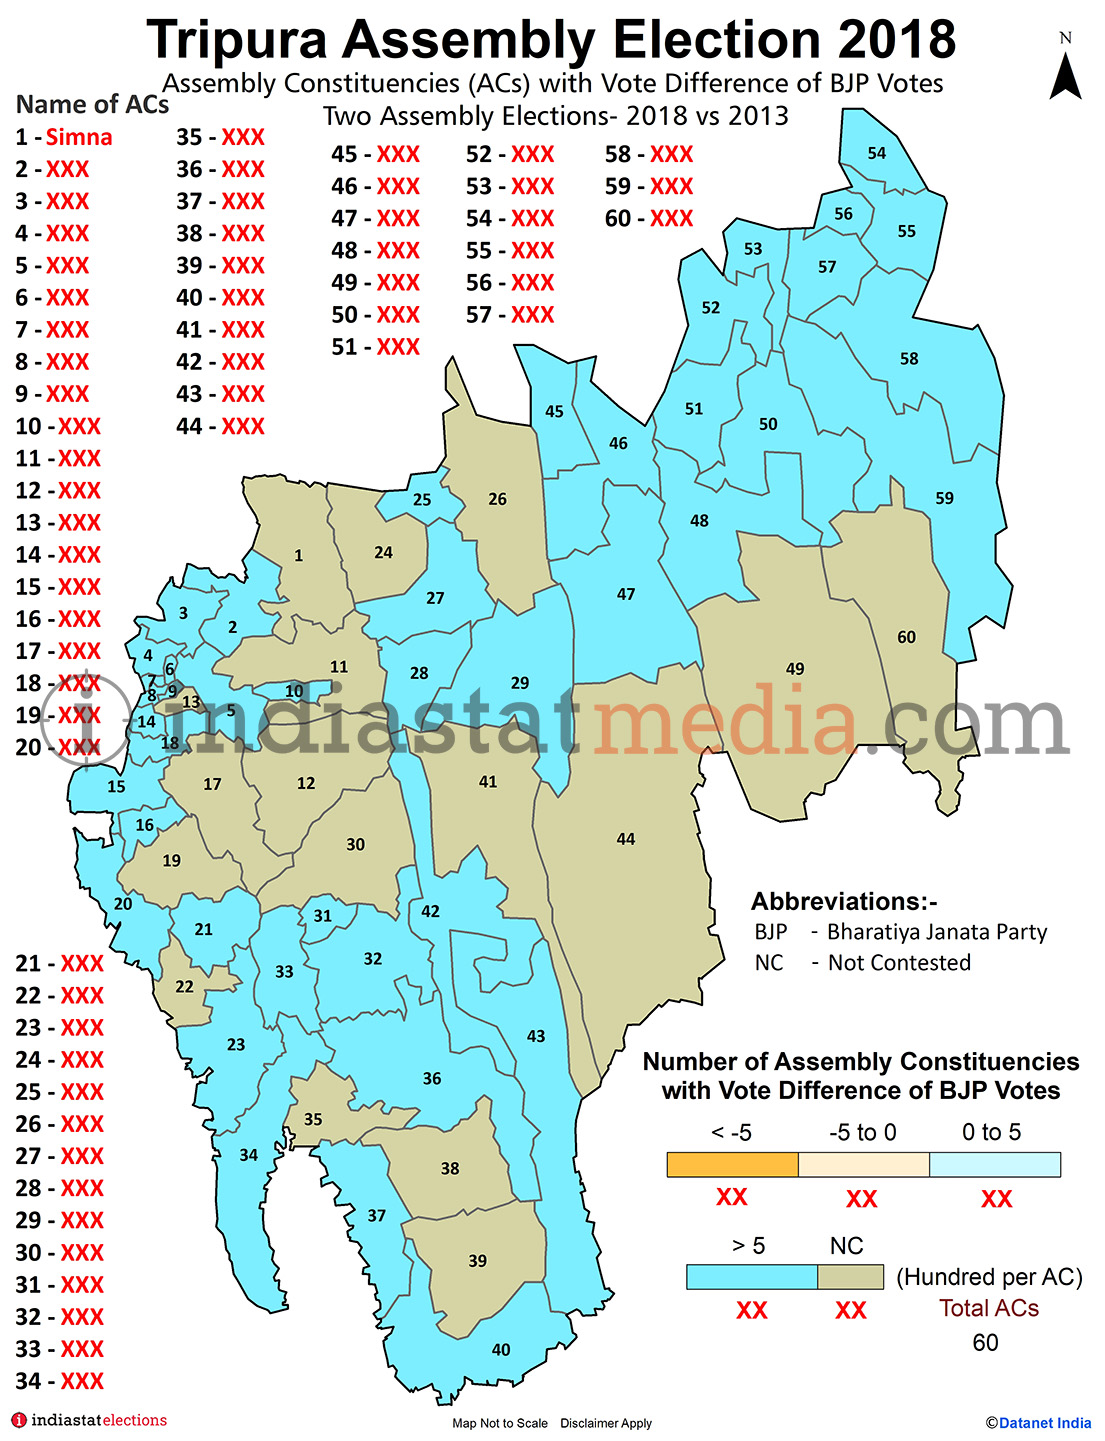 Assembly Constituencies with Vote Difference of BJP Votes in Tripura (Assembly Elections - 2013 & 2018)